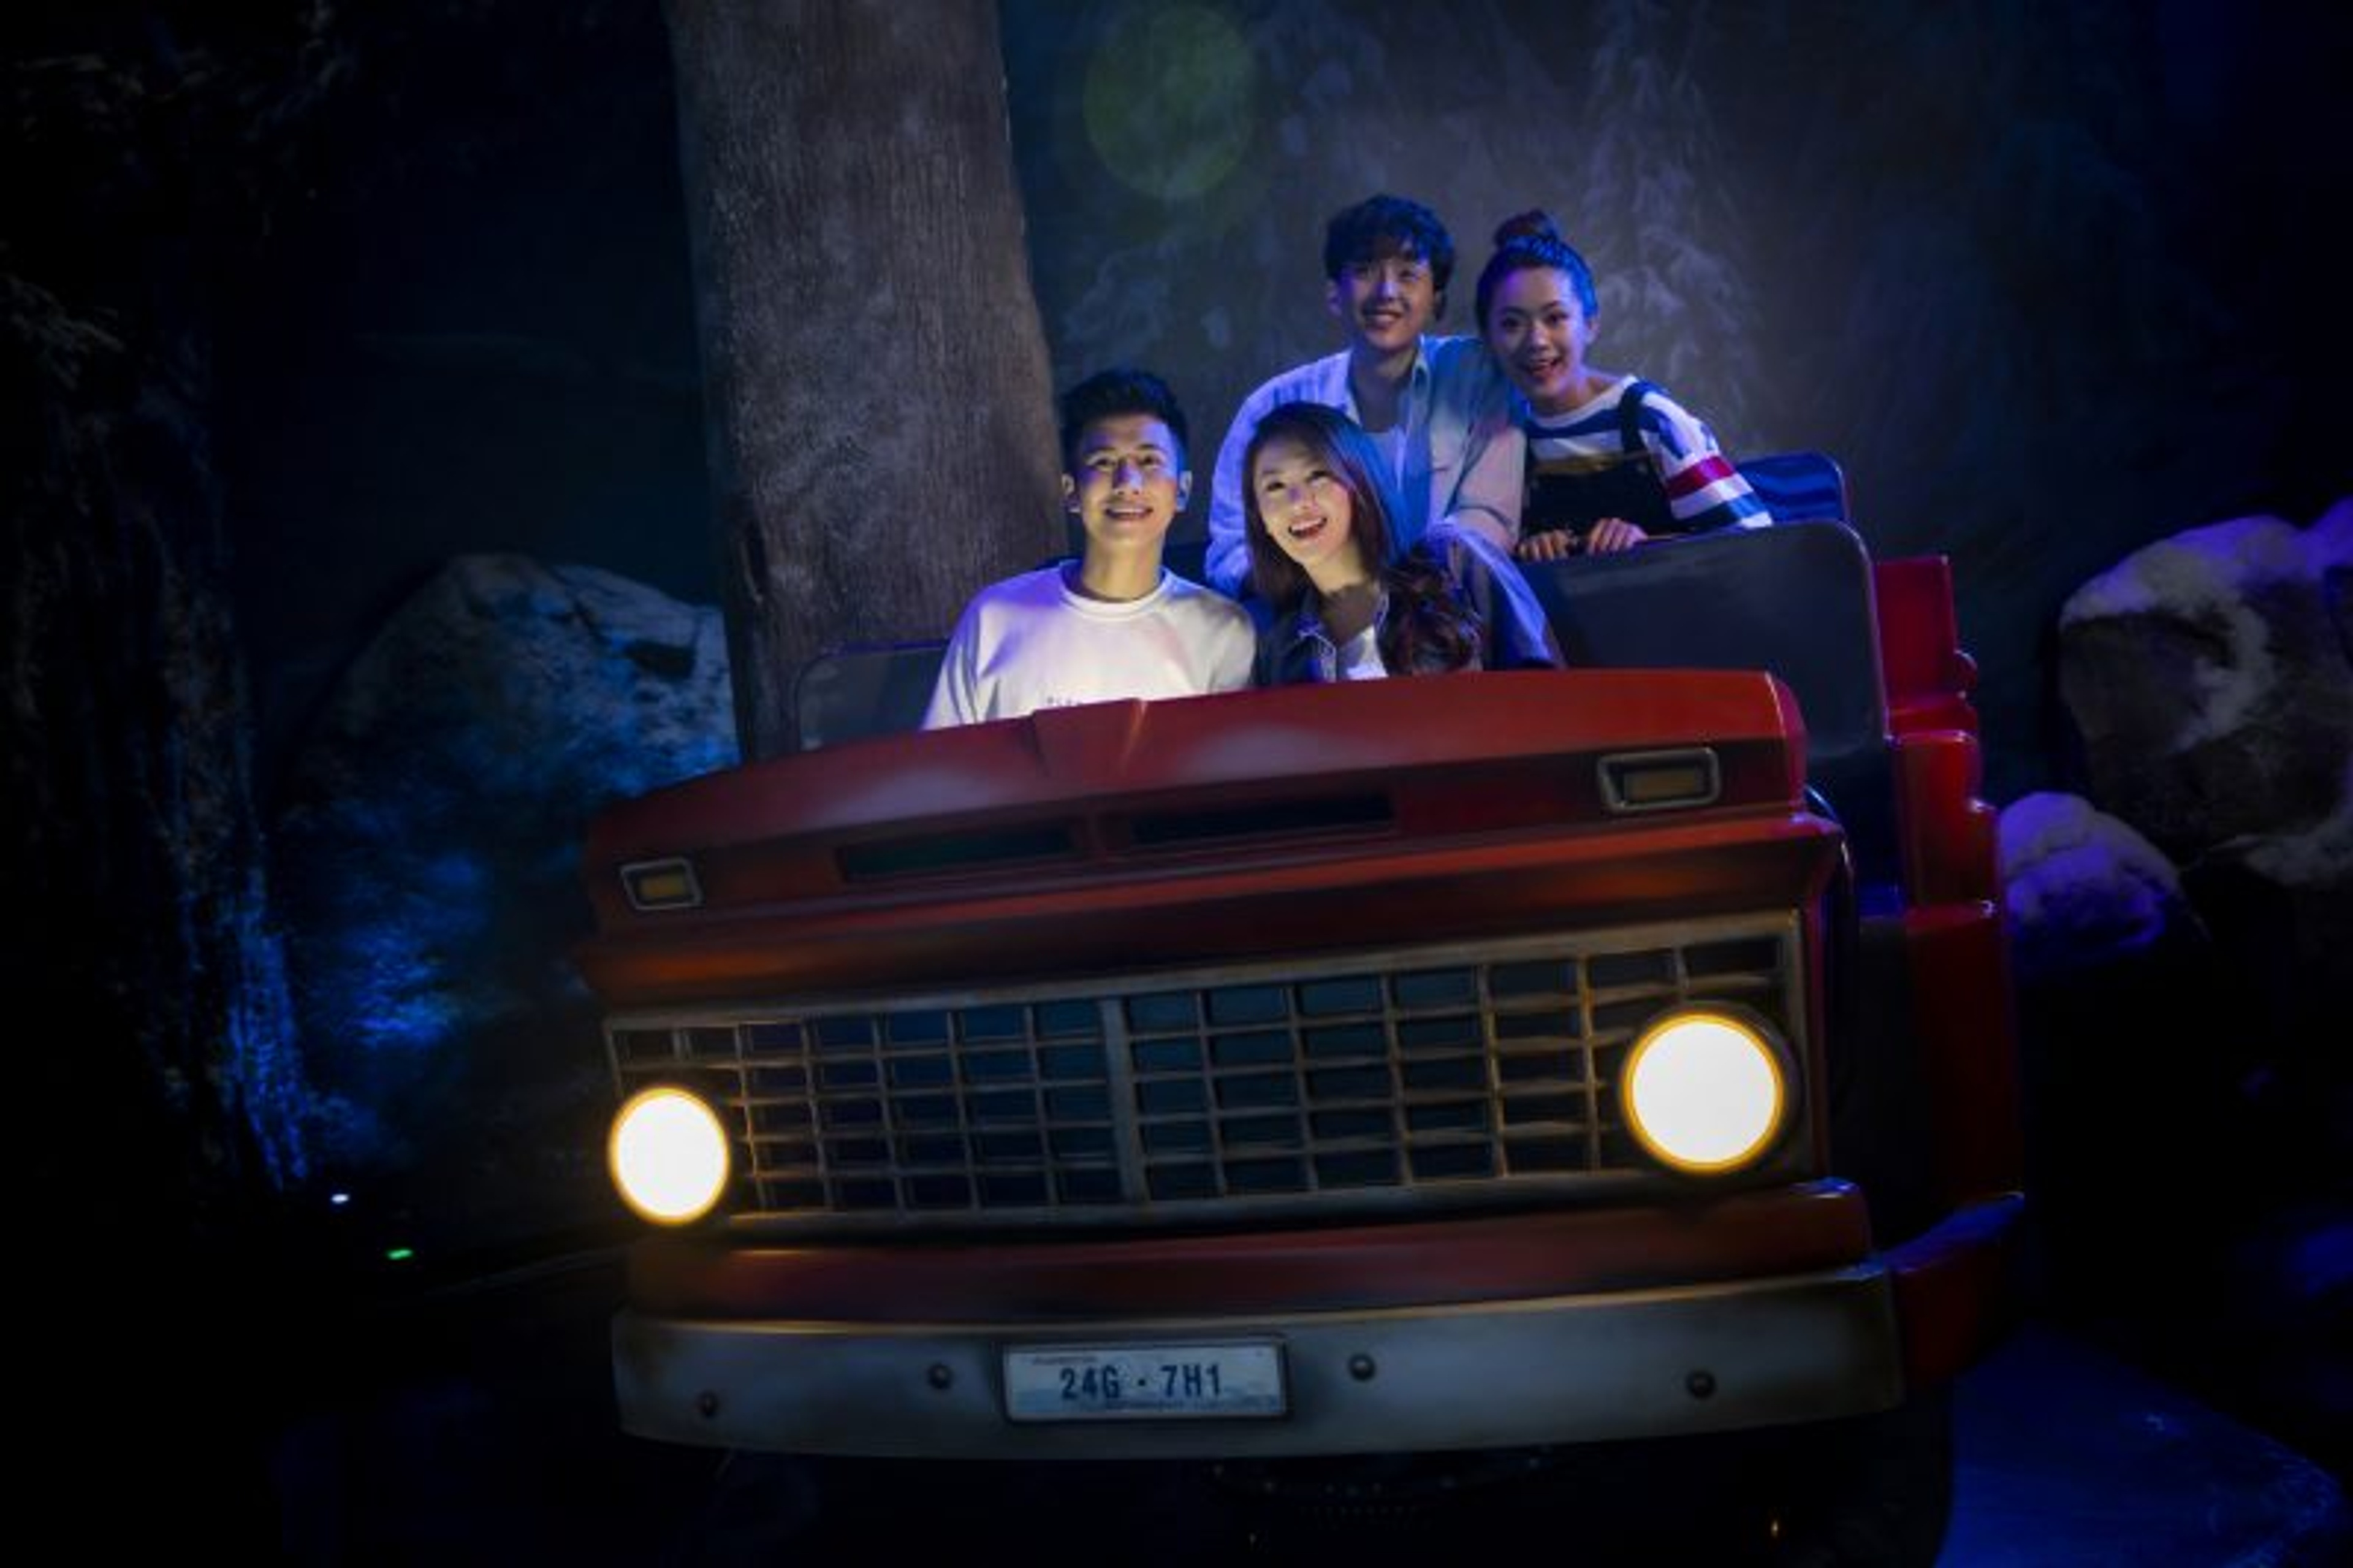 People enjoying a ride in a car at night from a Lionsgate film